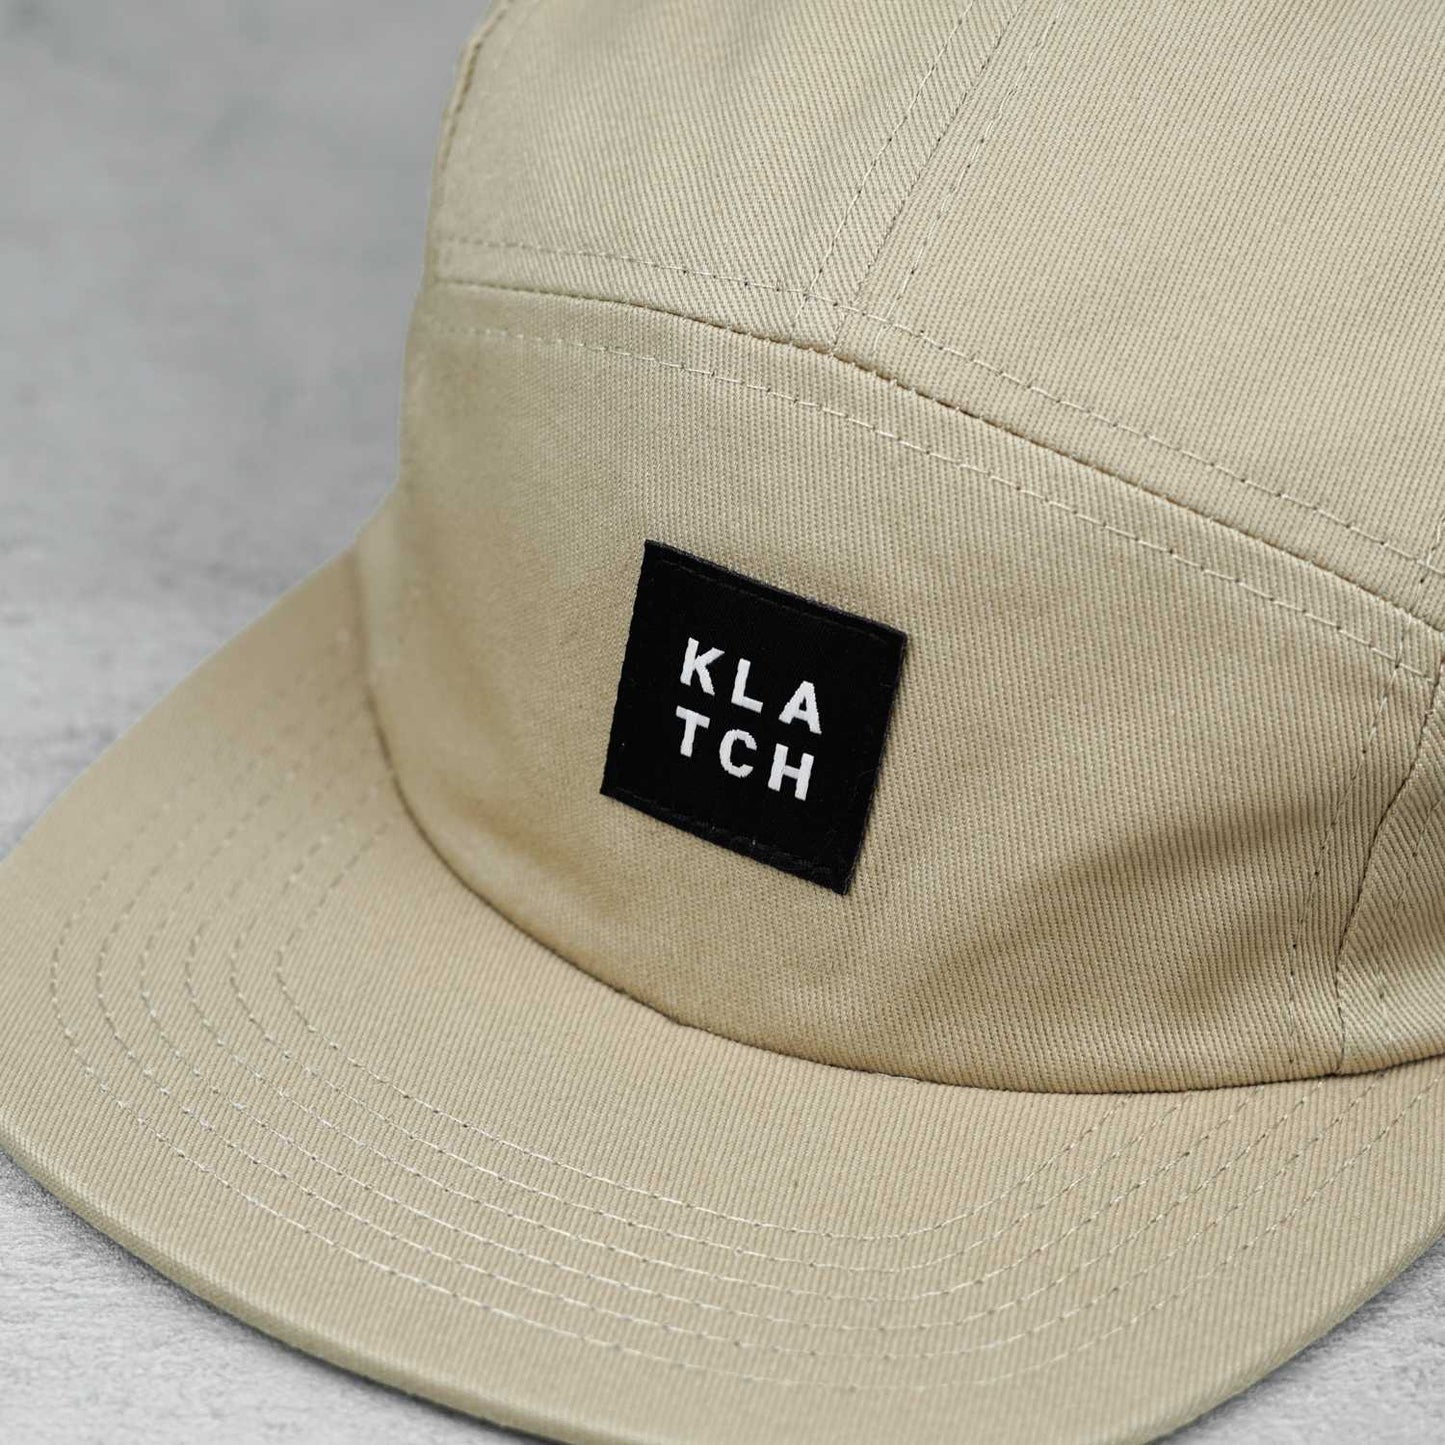 woven label on tan five panel hat